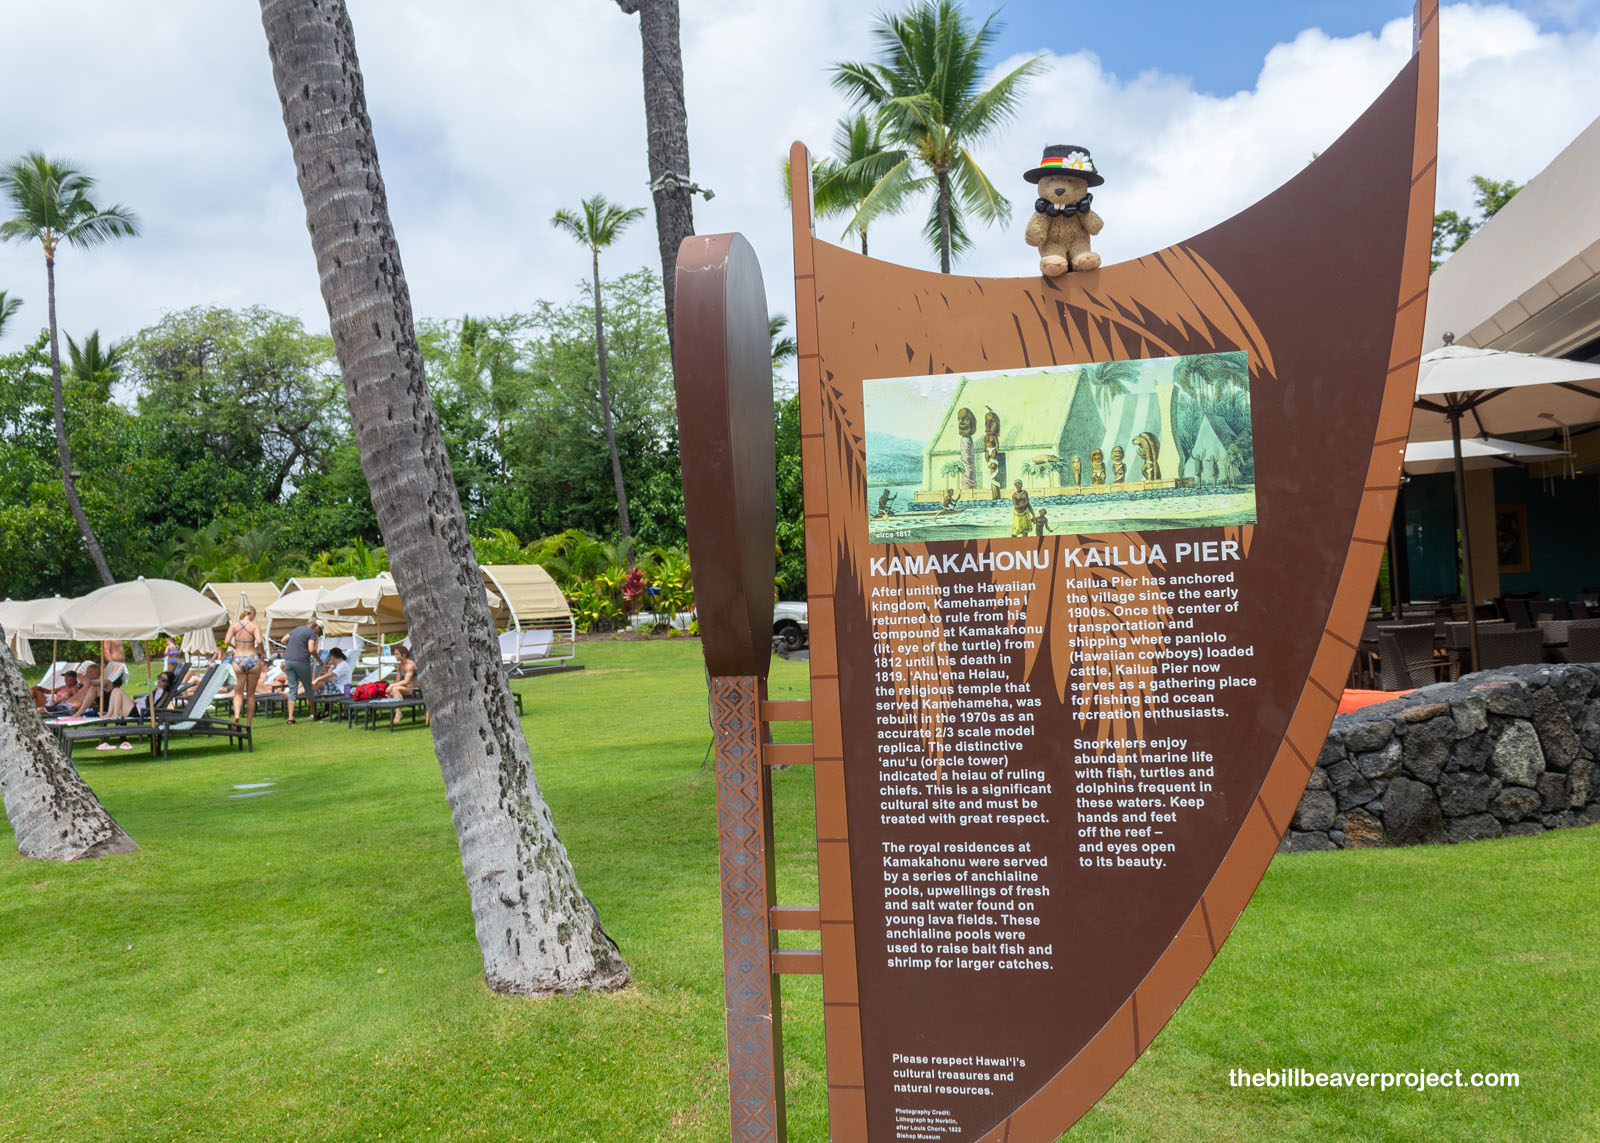 Some information about the Kailua Pier at Kamakahonu!